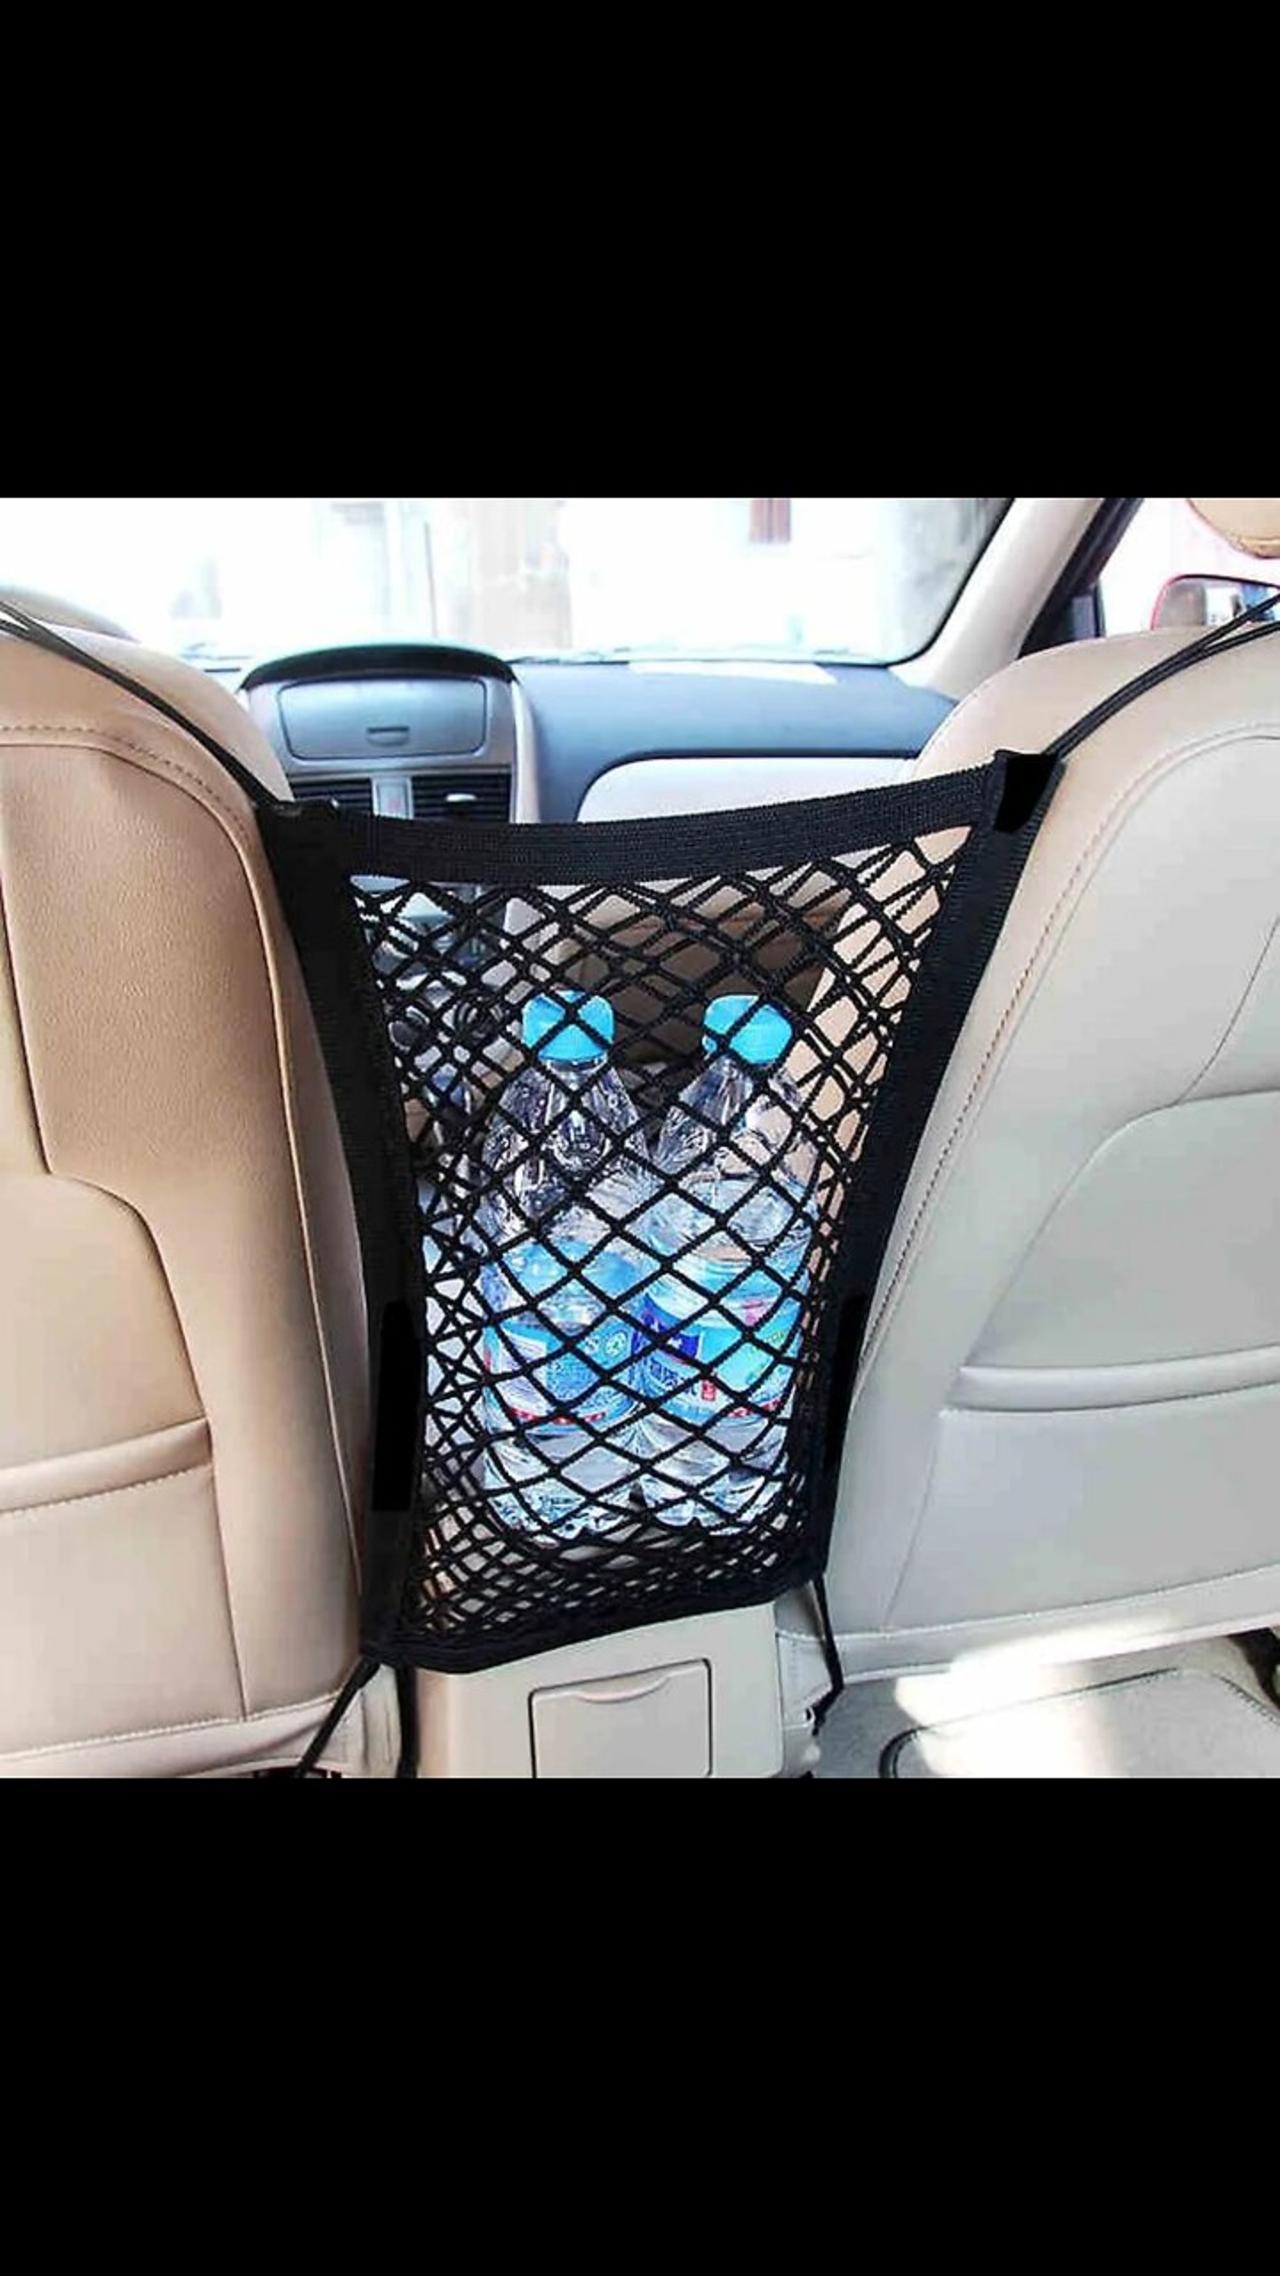 How to make the most of your car space with this amazing mesh net bag